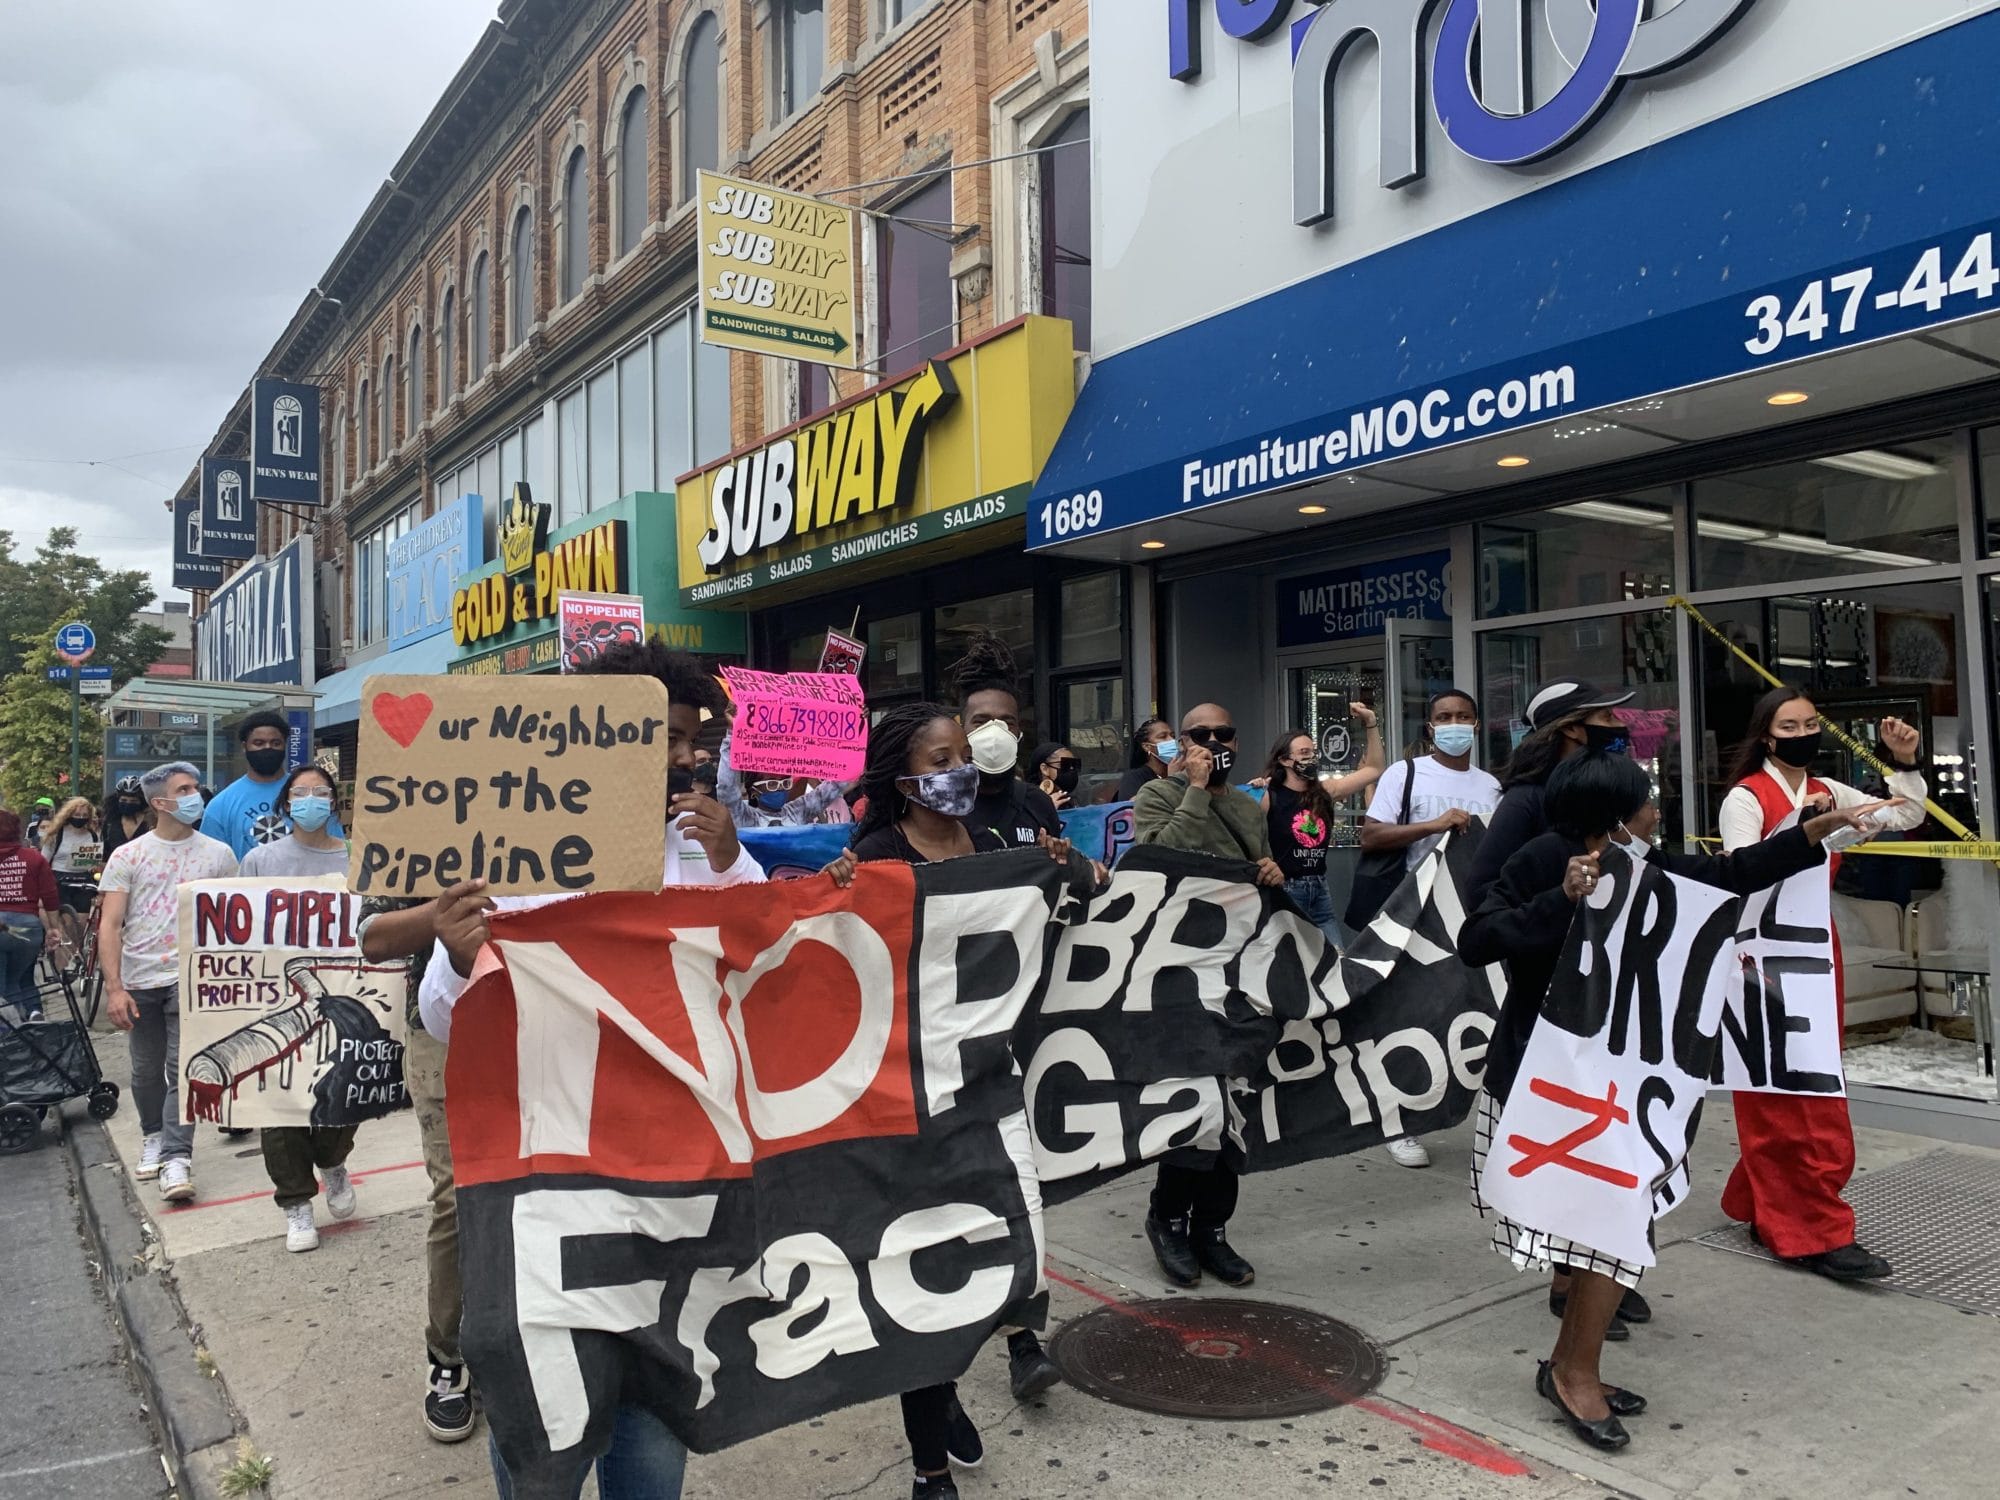 “Brownsville is not a sacrifice zone,” Activists Cry At Protest Against North Brooklyn Pipeline